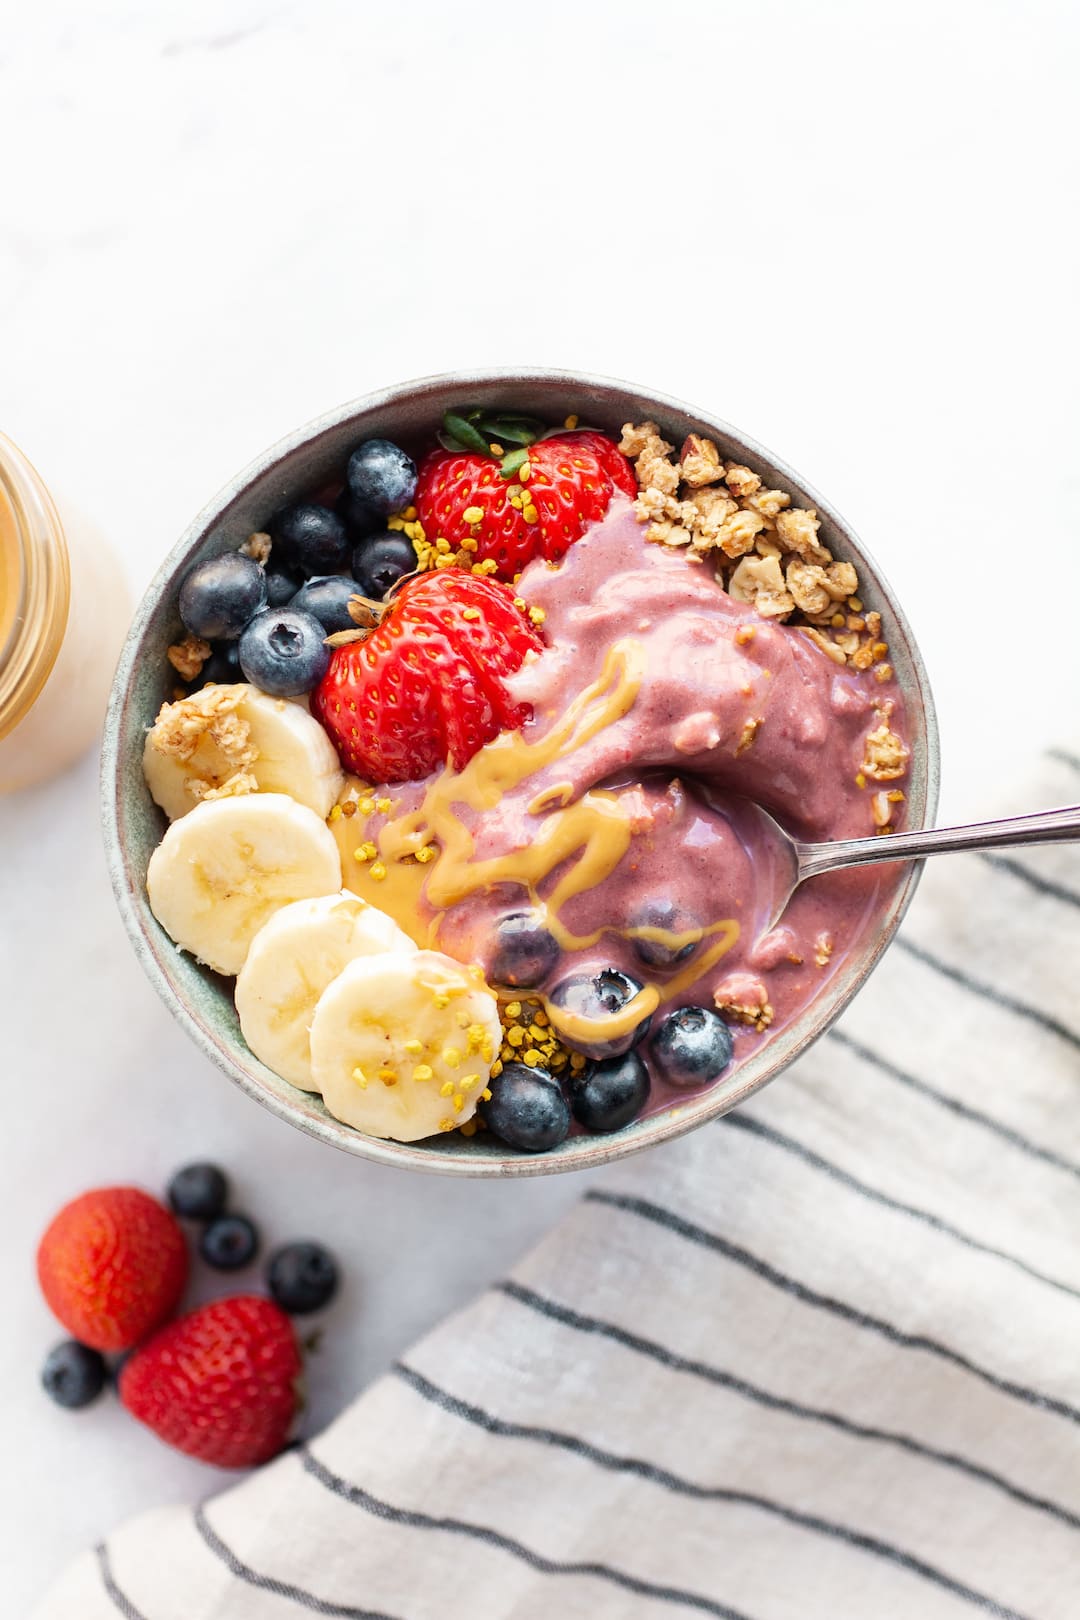 Simple and Easy Peanut Butter Acai Bowl - Gluten Free, Vegan